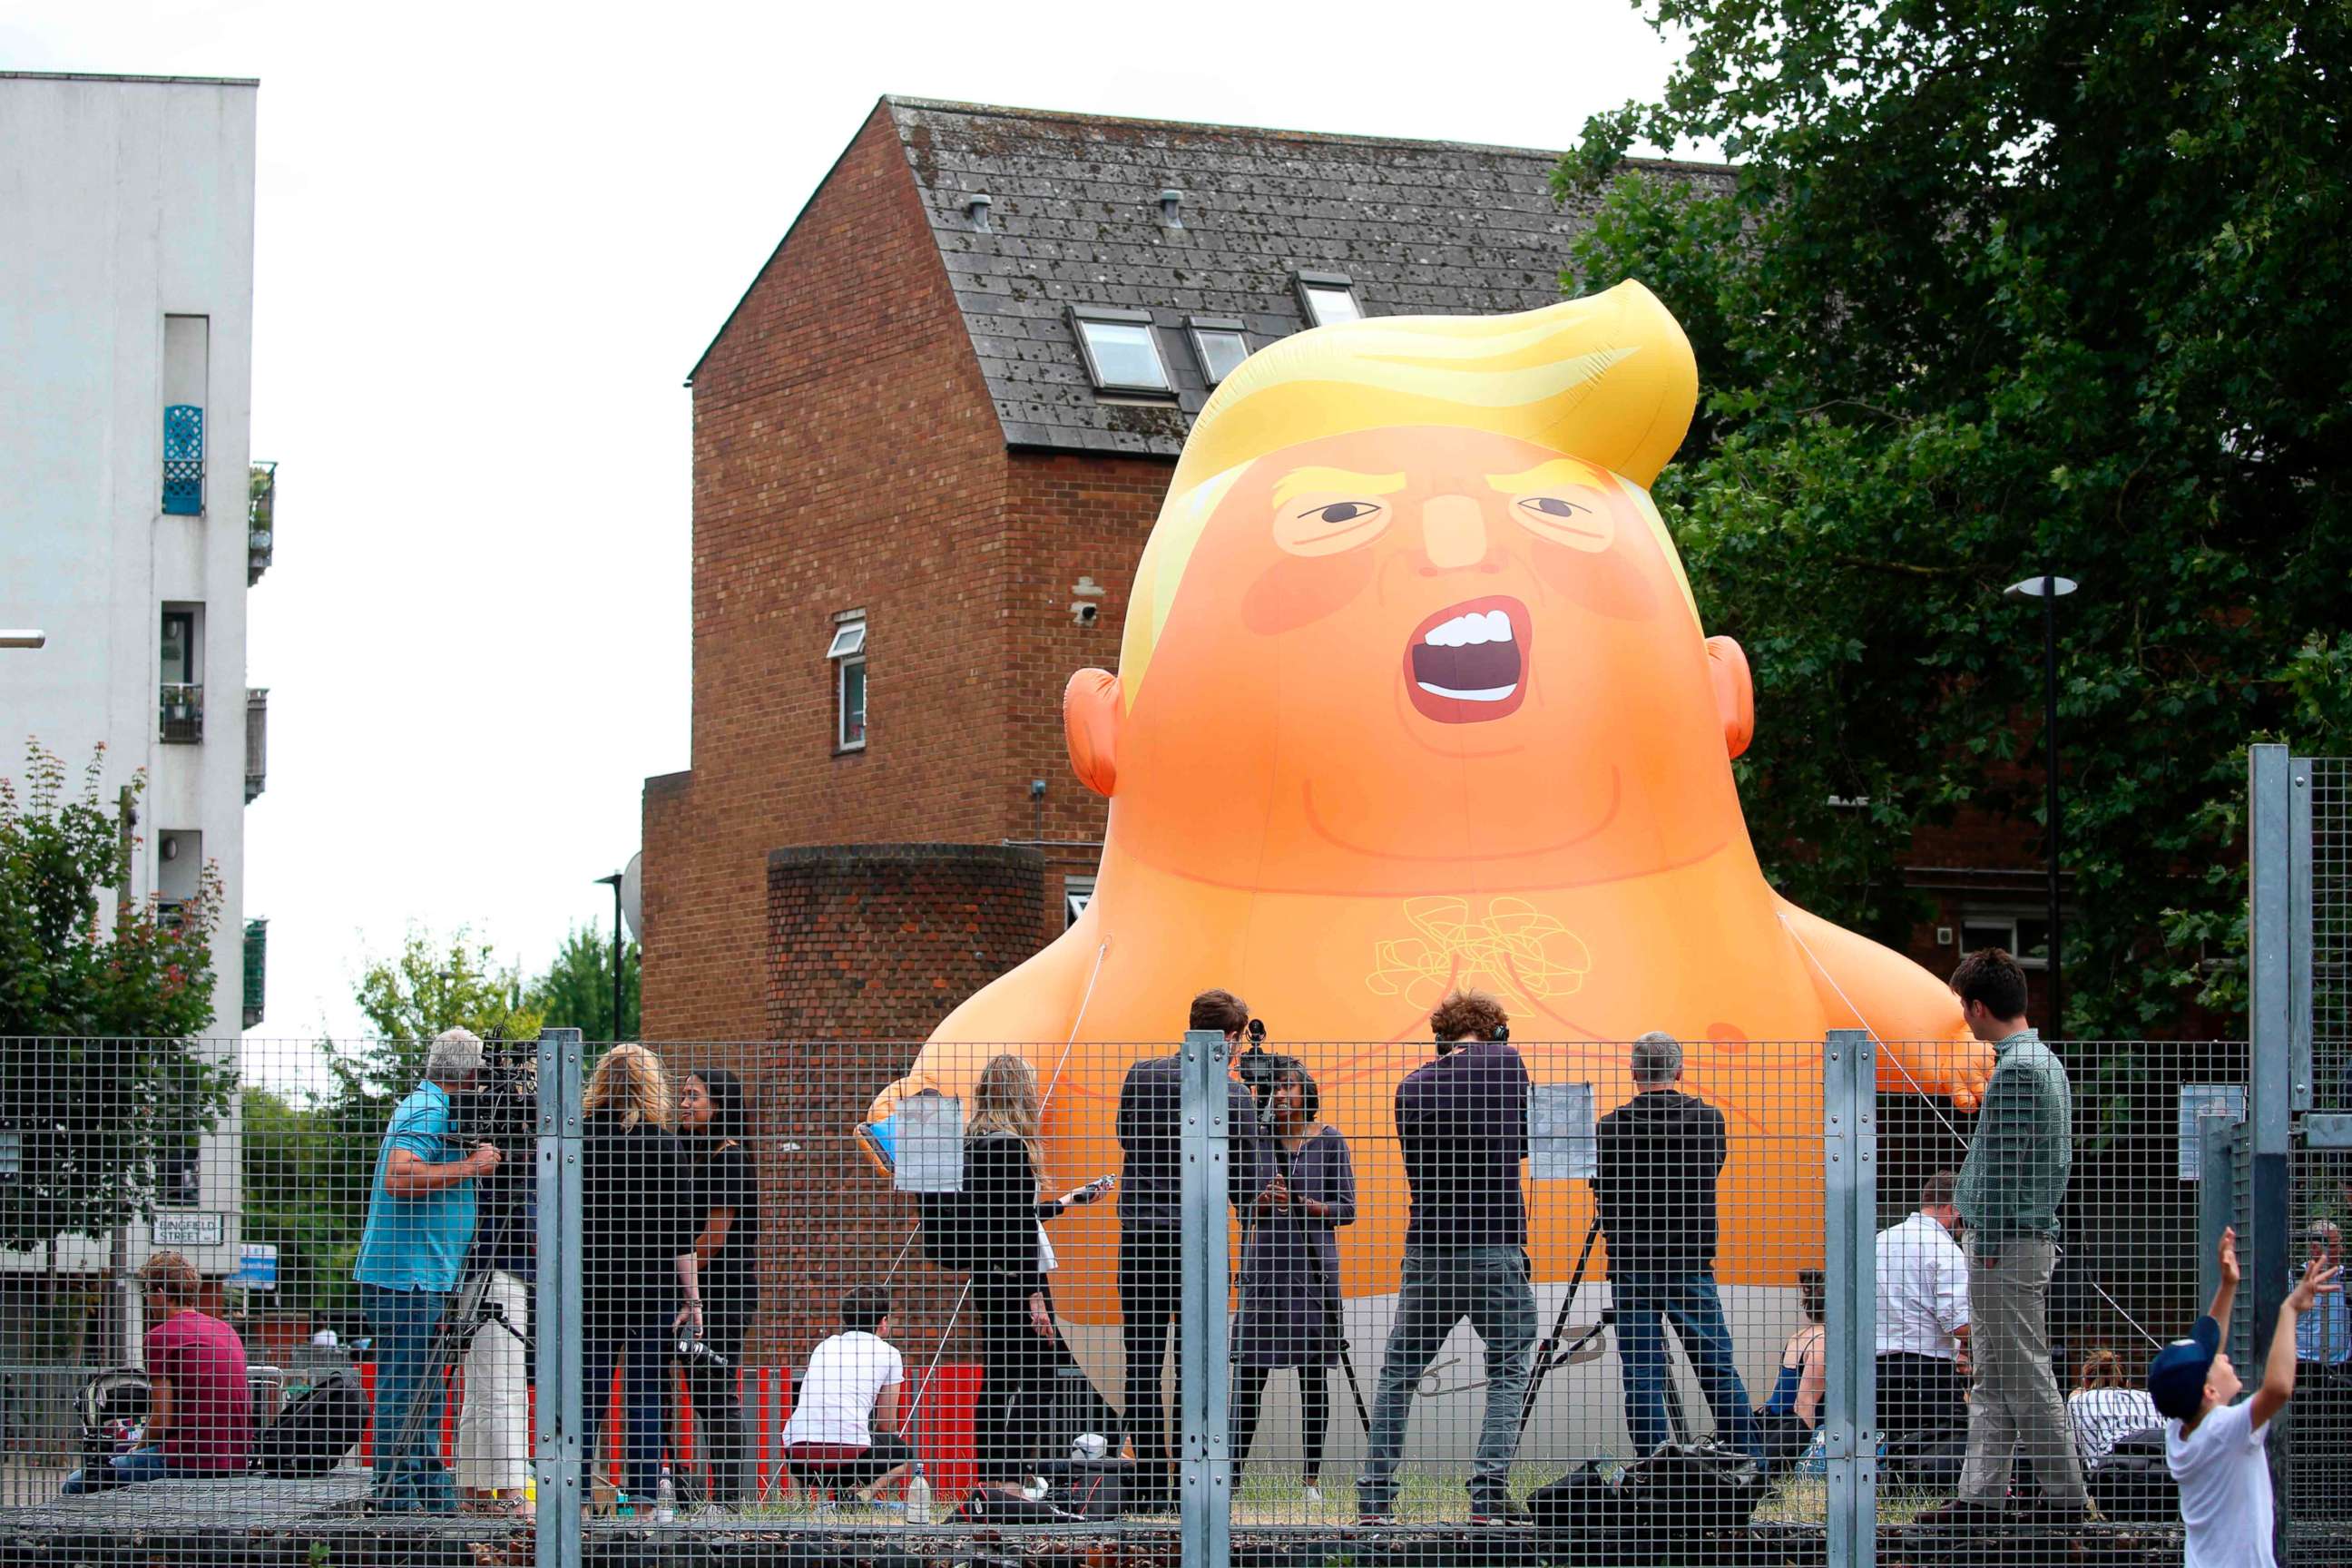 PHOTO: Activists inflate a giant balloon depicting US President Donald Trump as an orange baby in north London on July 10, 2018.